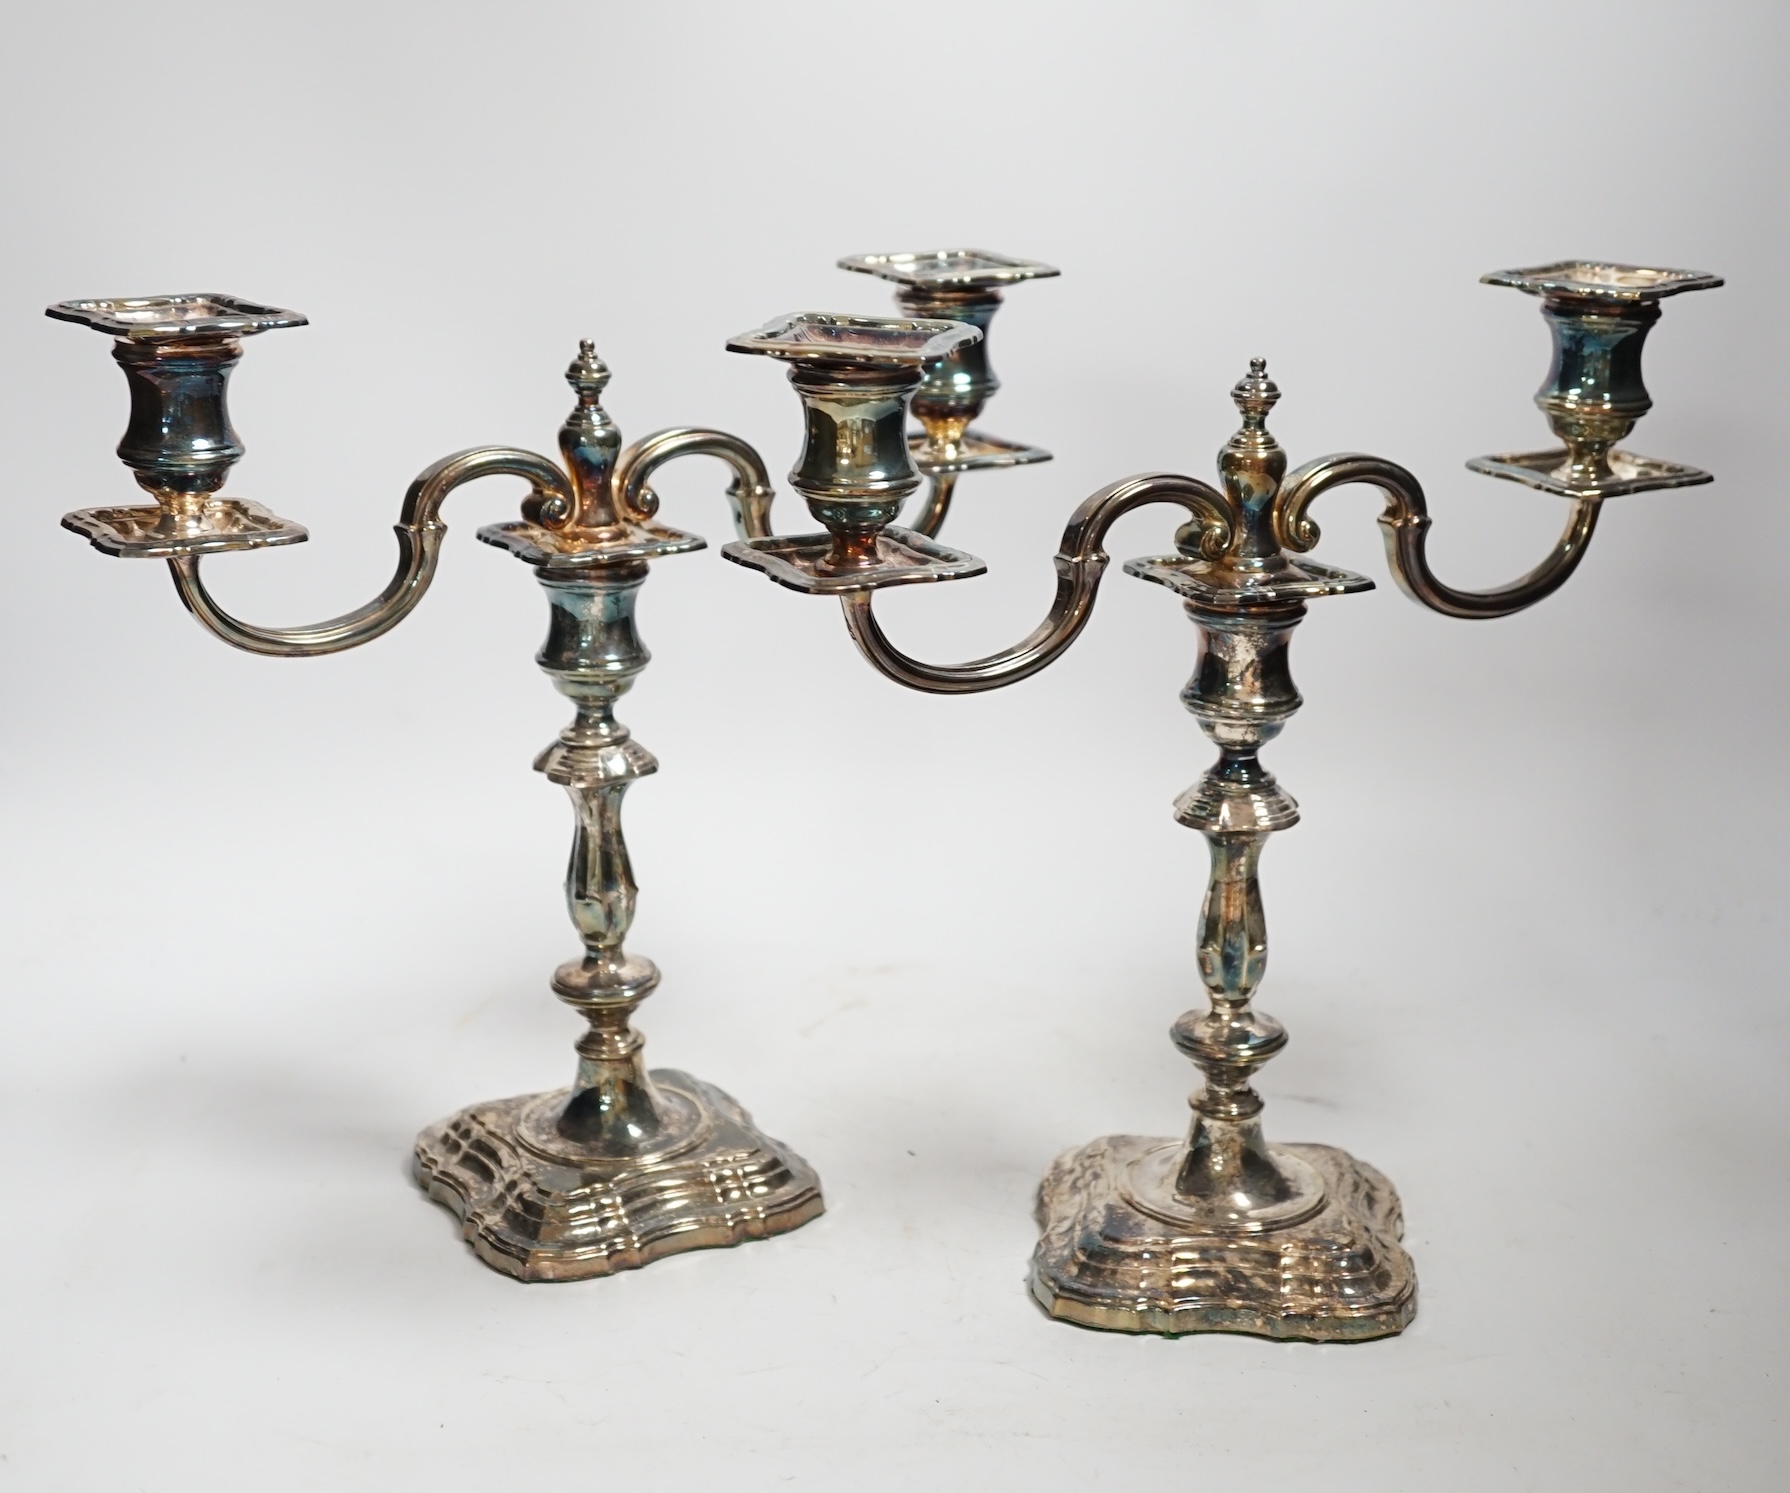 A modern pair of silver two branch, two light candelabra, C.J. Vander Ltd, London, 2000, height 25cm, weighable silver 36oz.